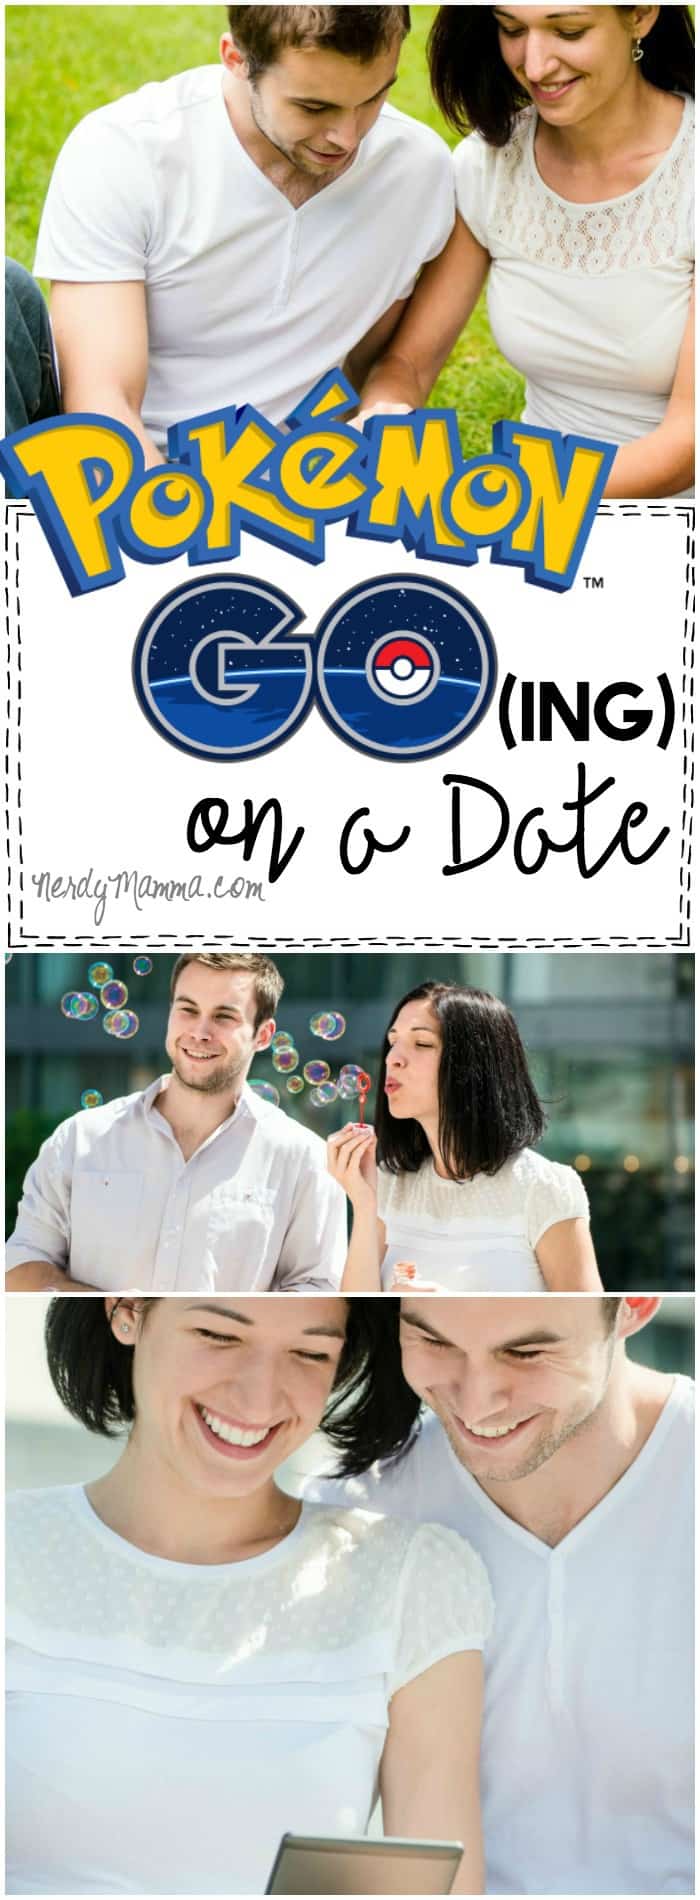 OMG! These Pokémon GO(ing) on a Date {Pokémon GO Date Ideas} are so EASY--and awesome. I can't wait now.